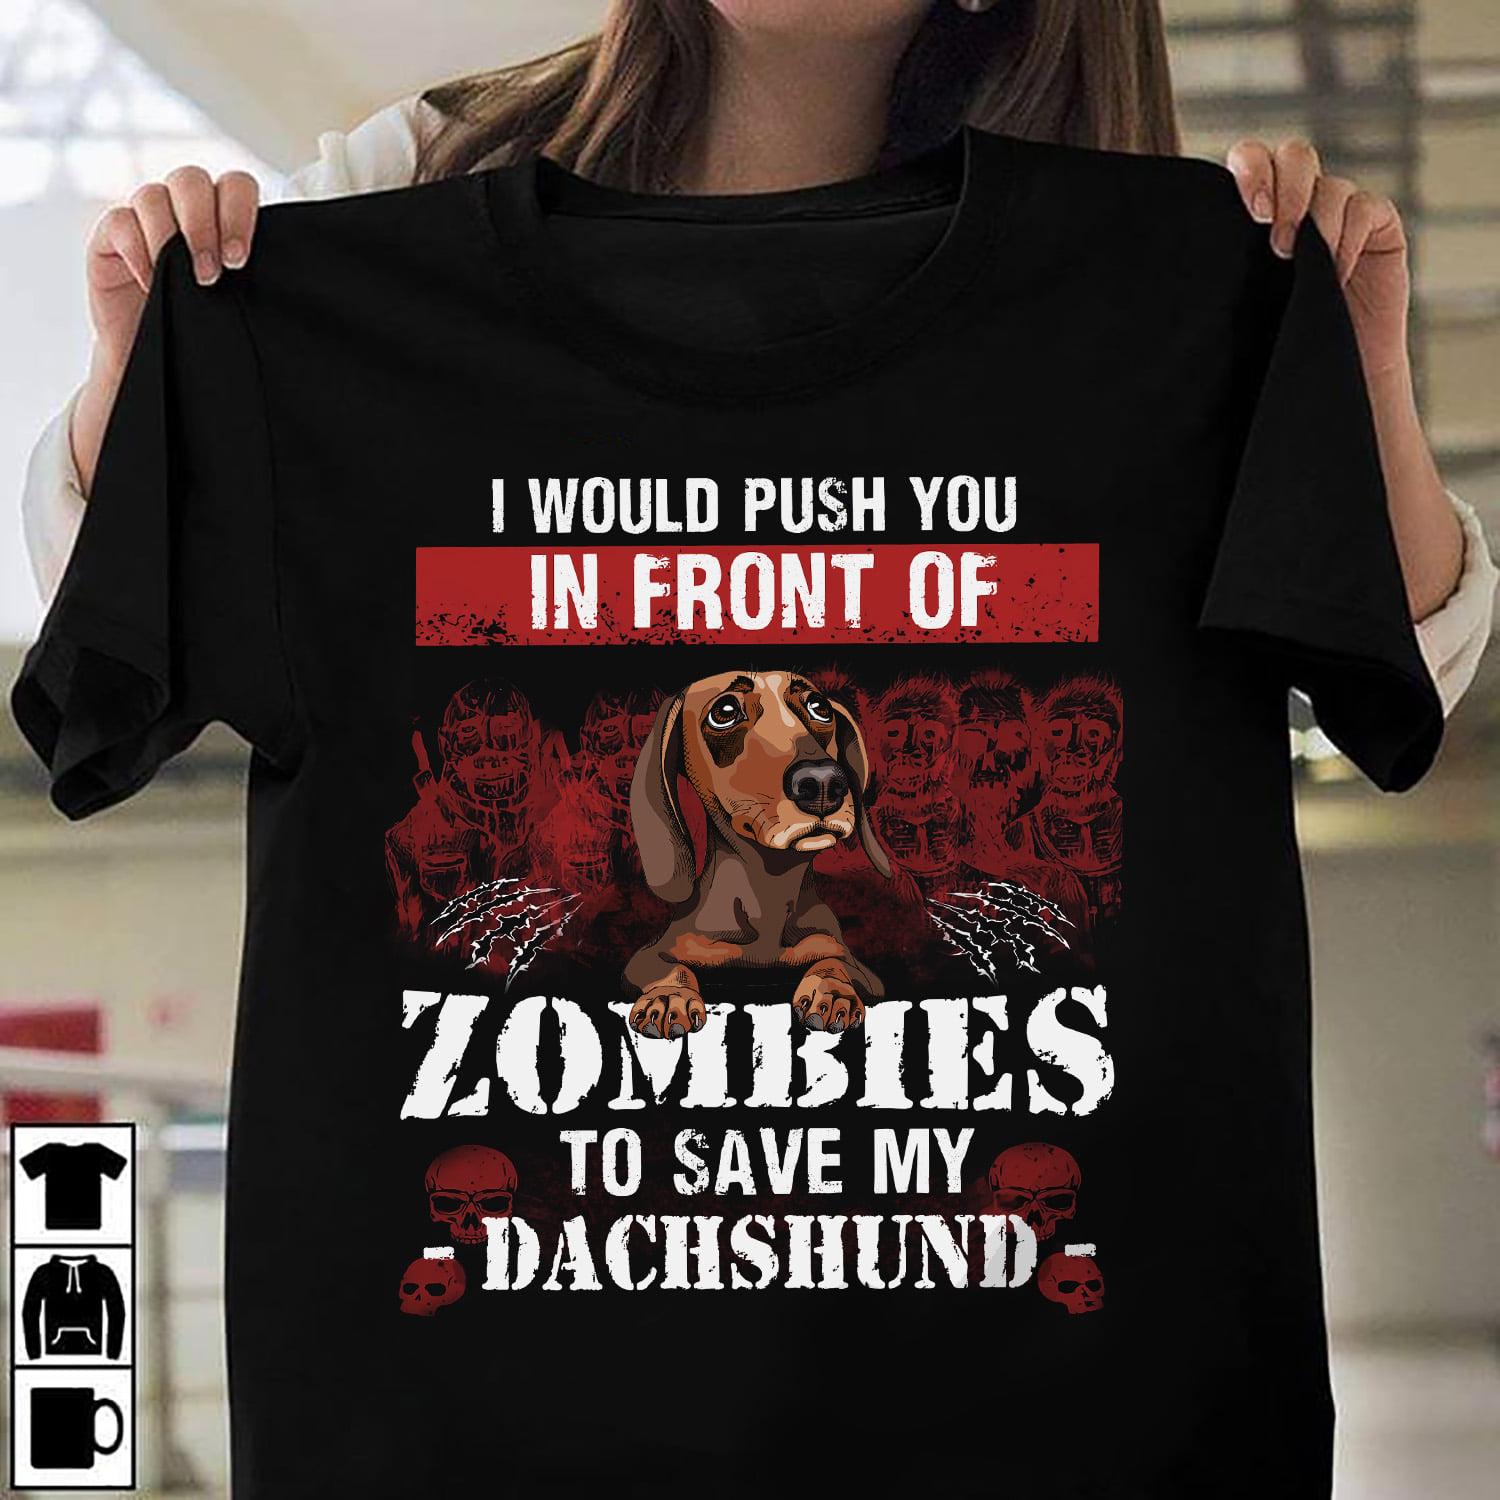 Halloween Zombies Dachshund - I would push you in front of zombies to save my dachshund